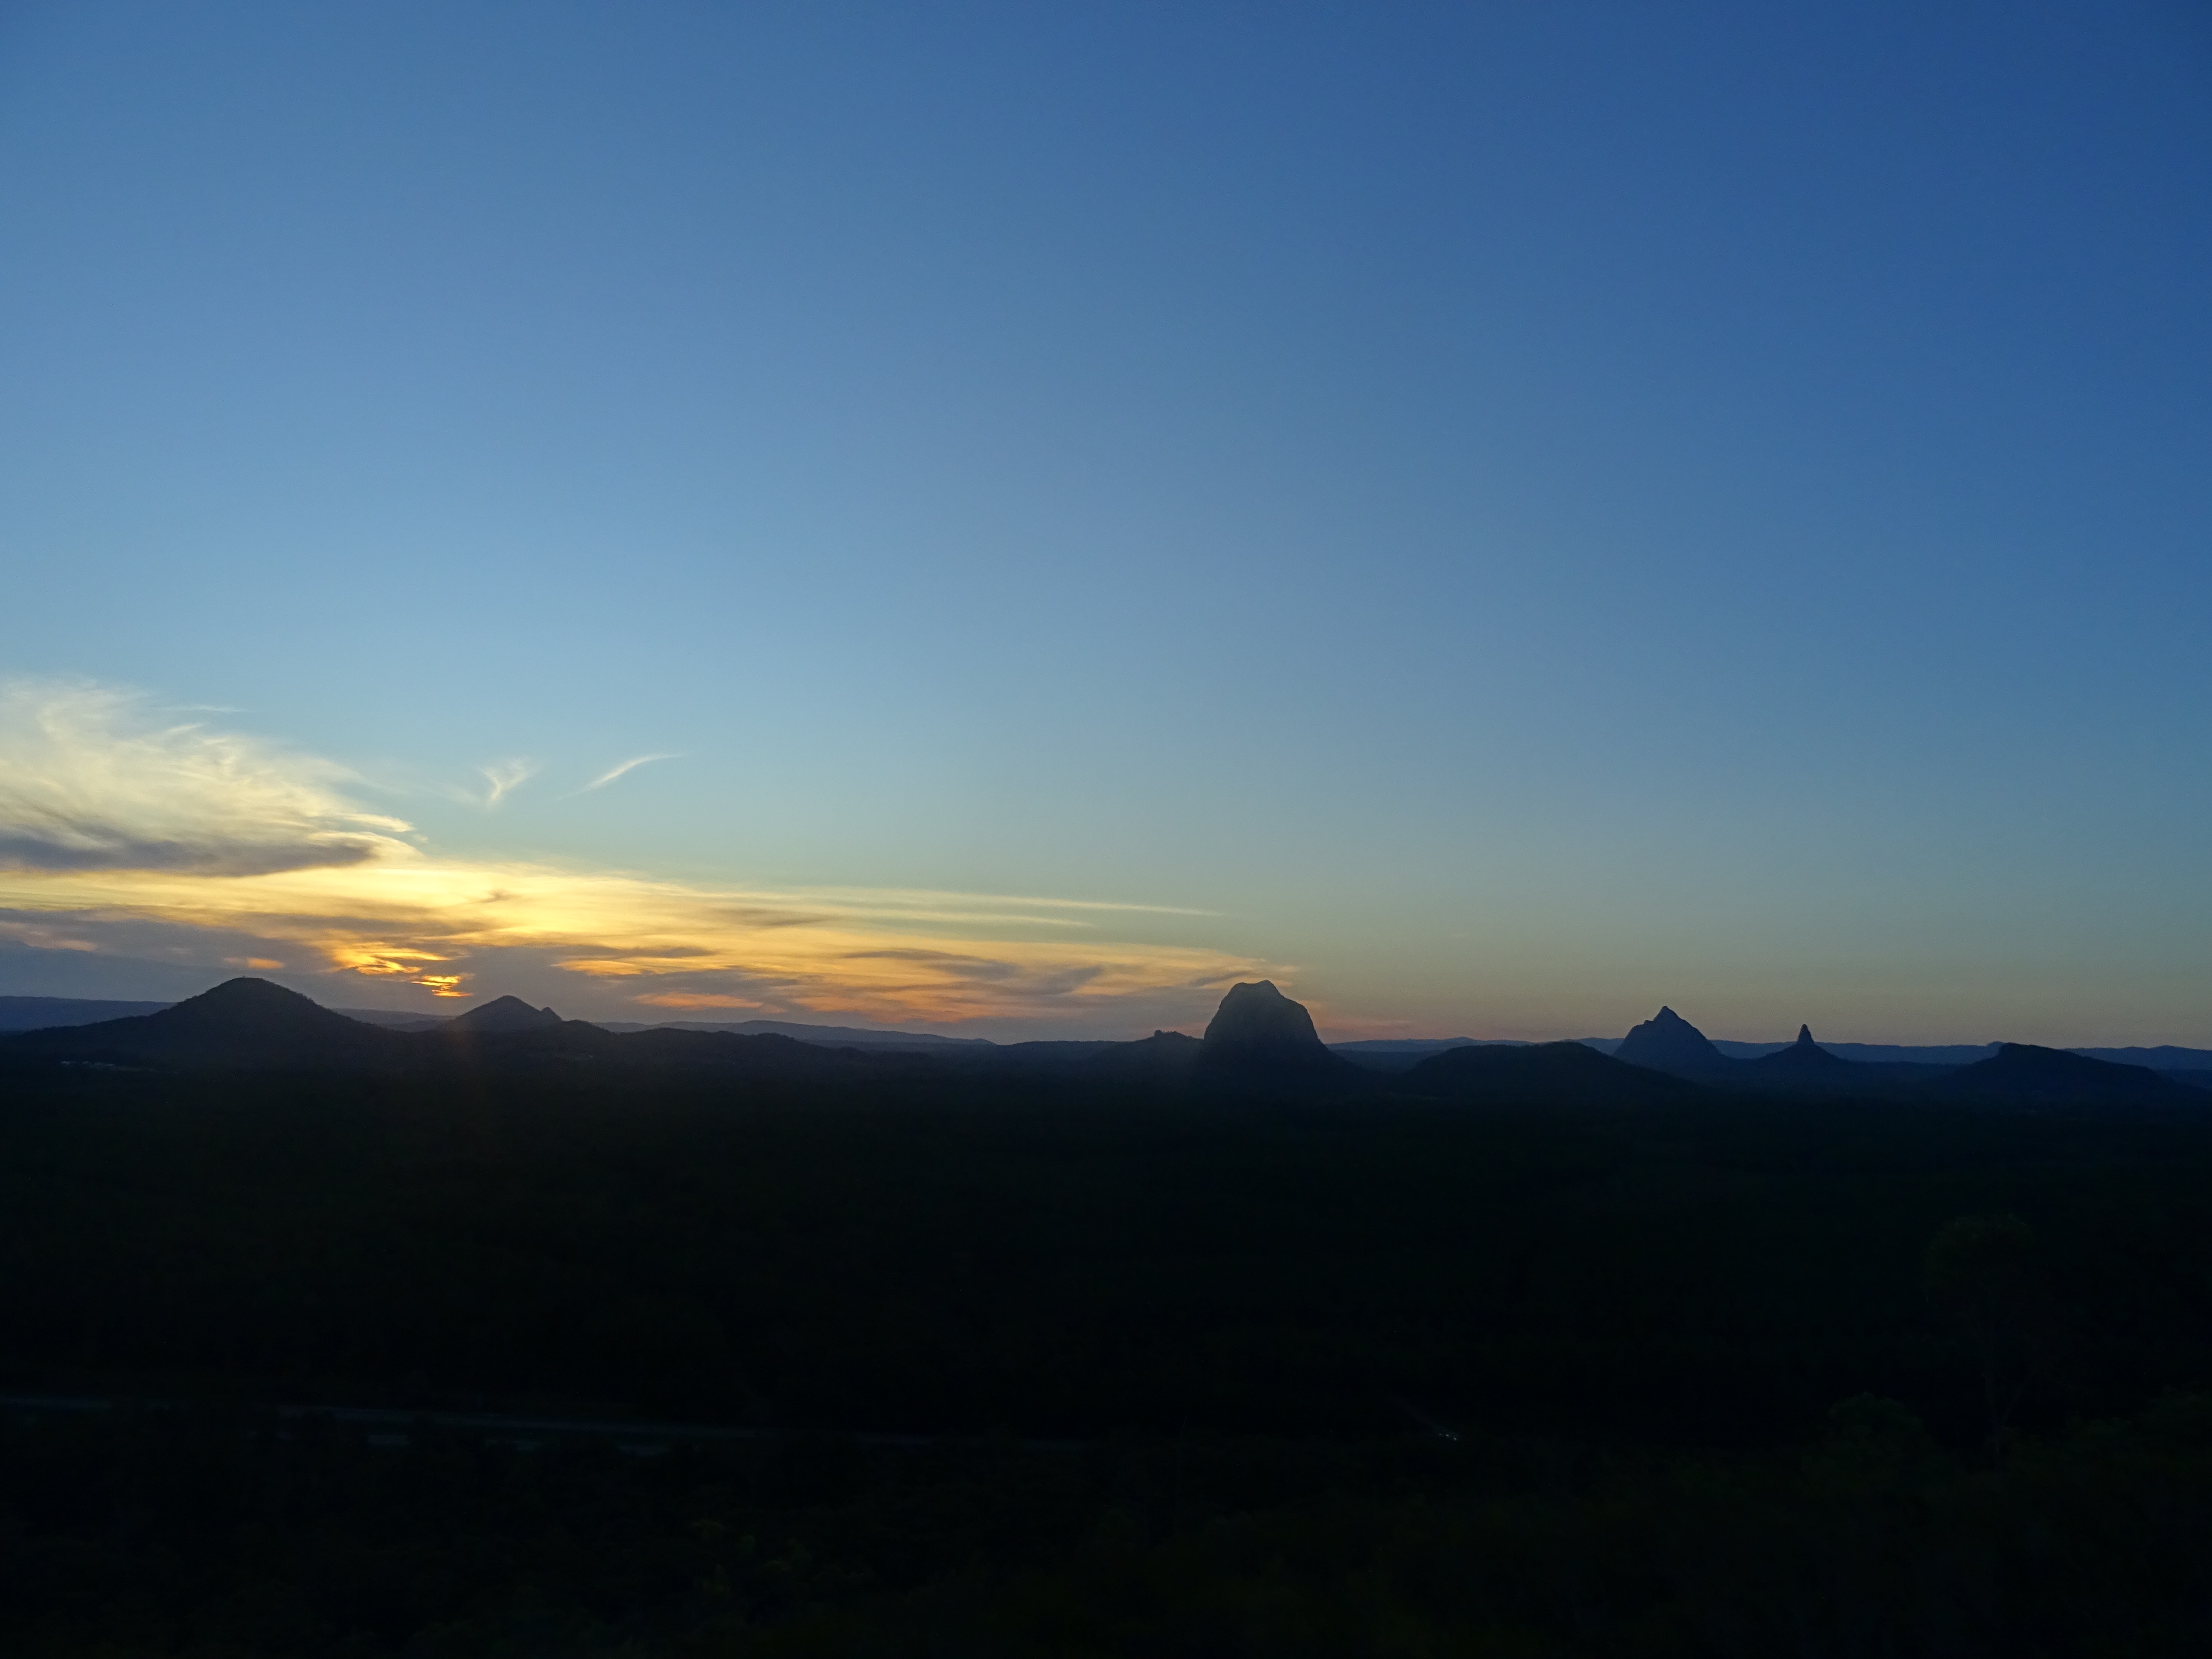 Sunset over the Glasshouse Mountains